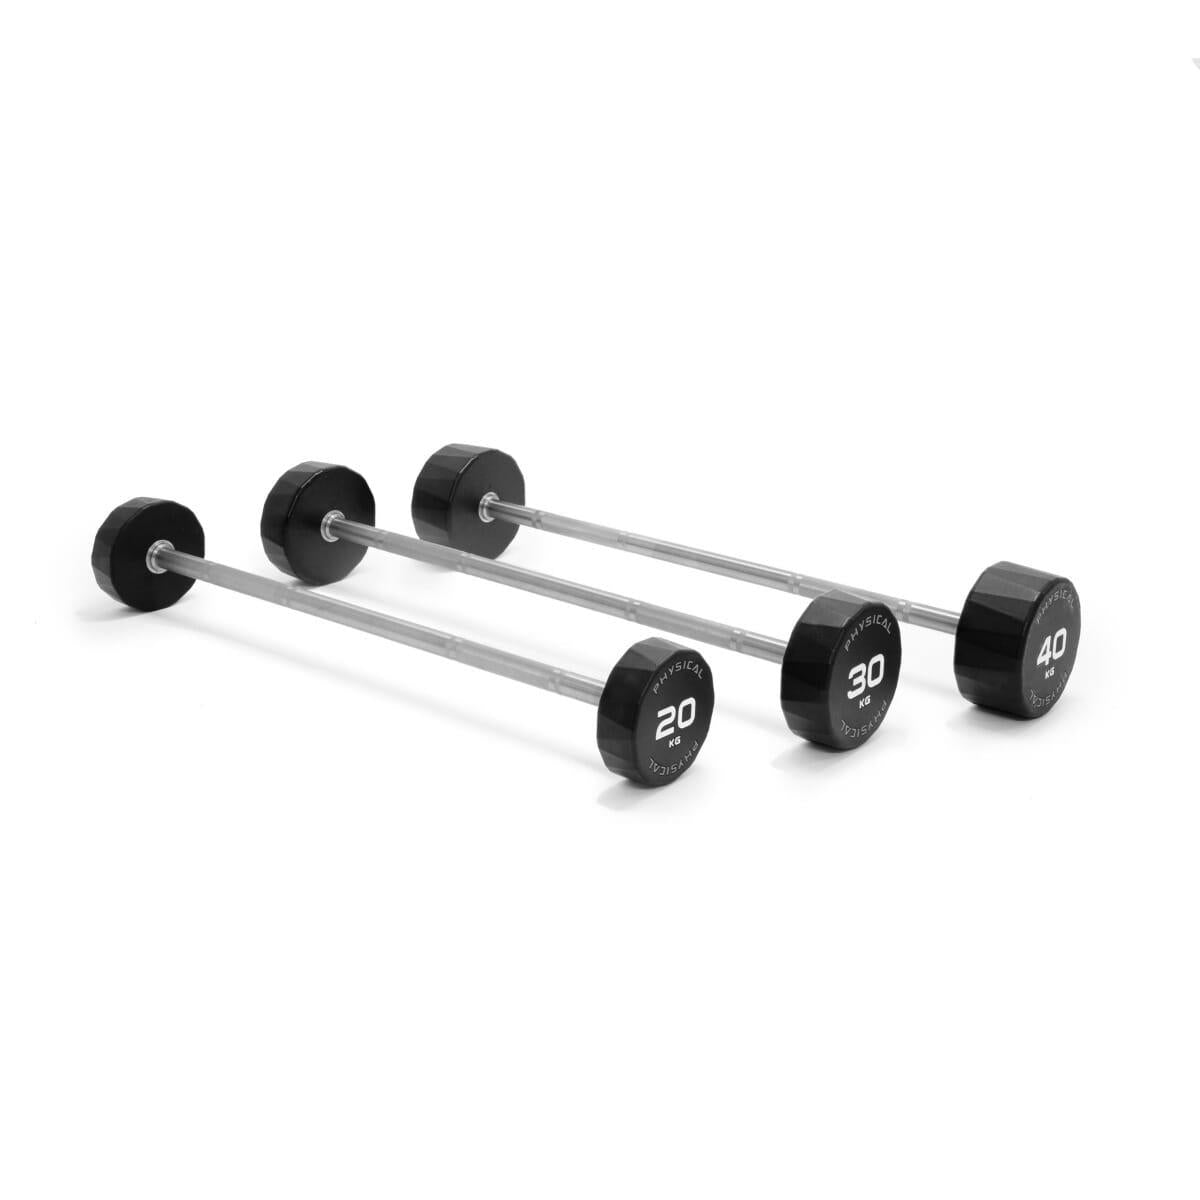 Physical Performance PU Barbell Weights